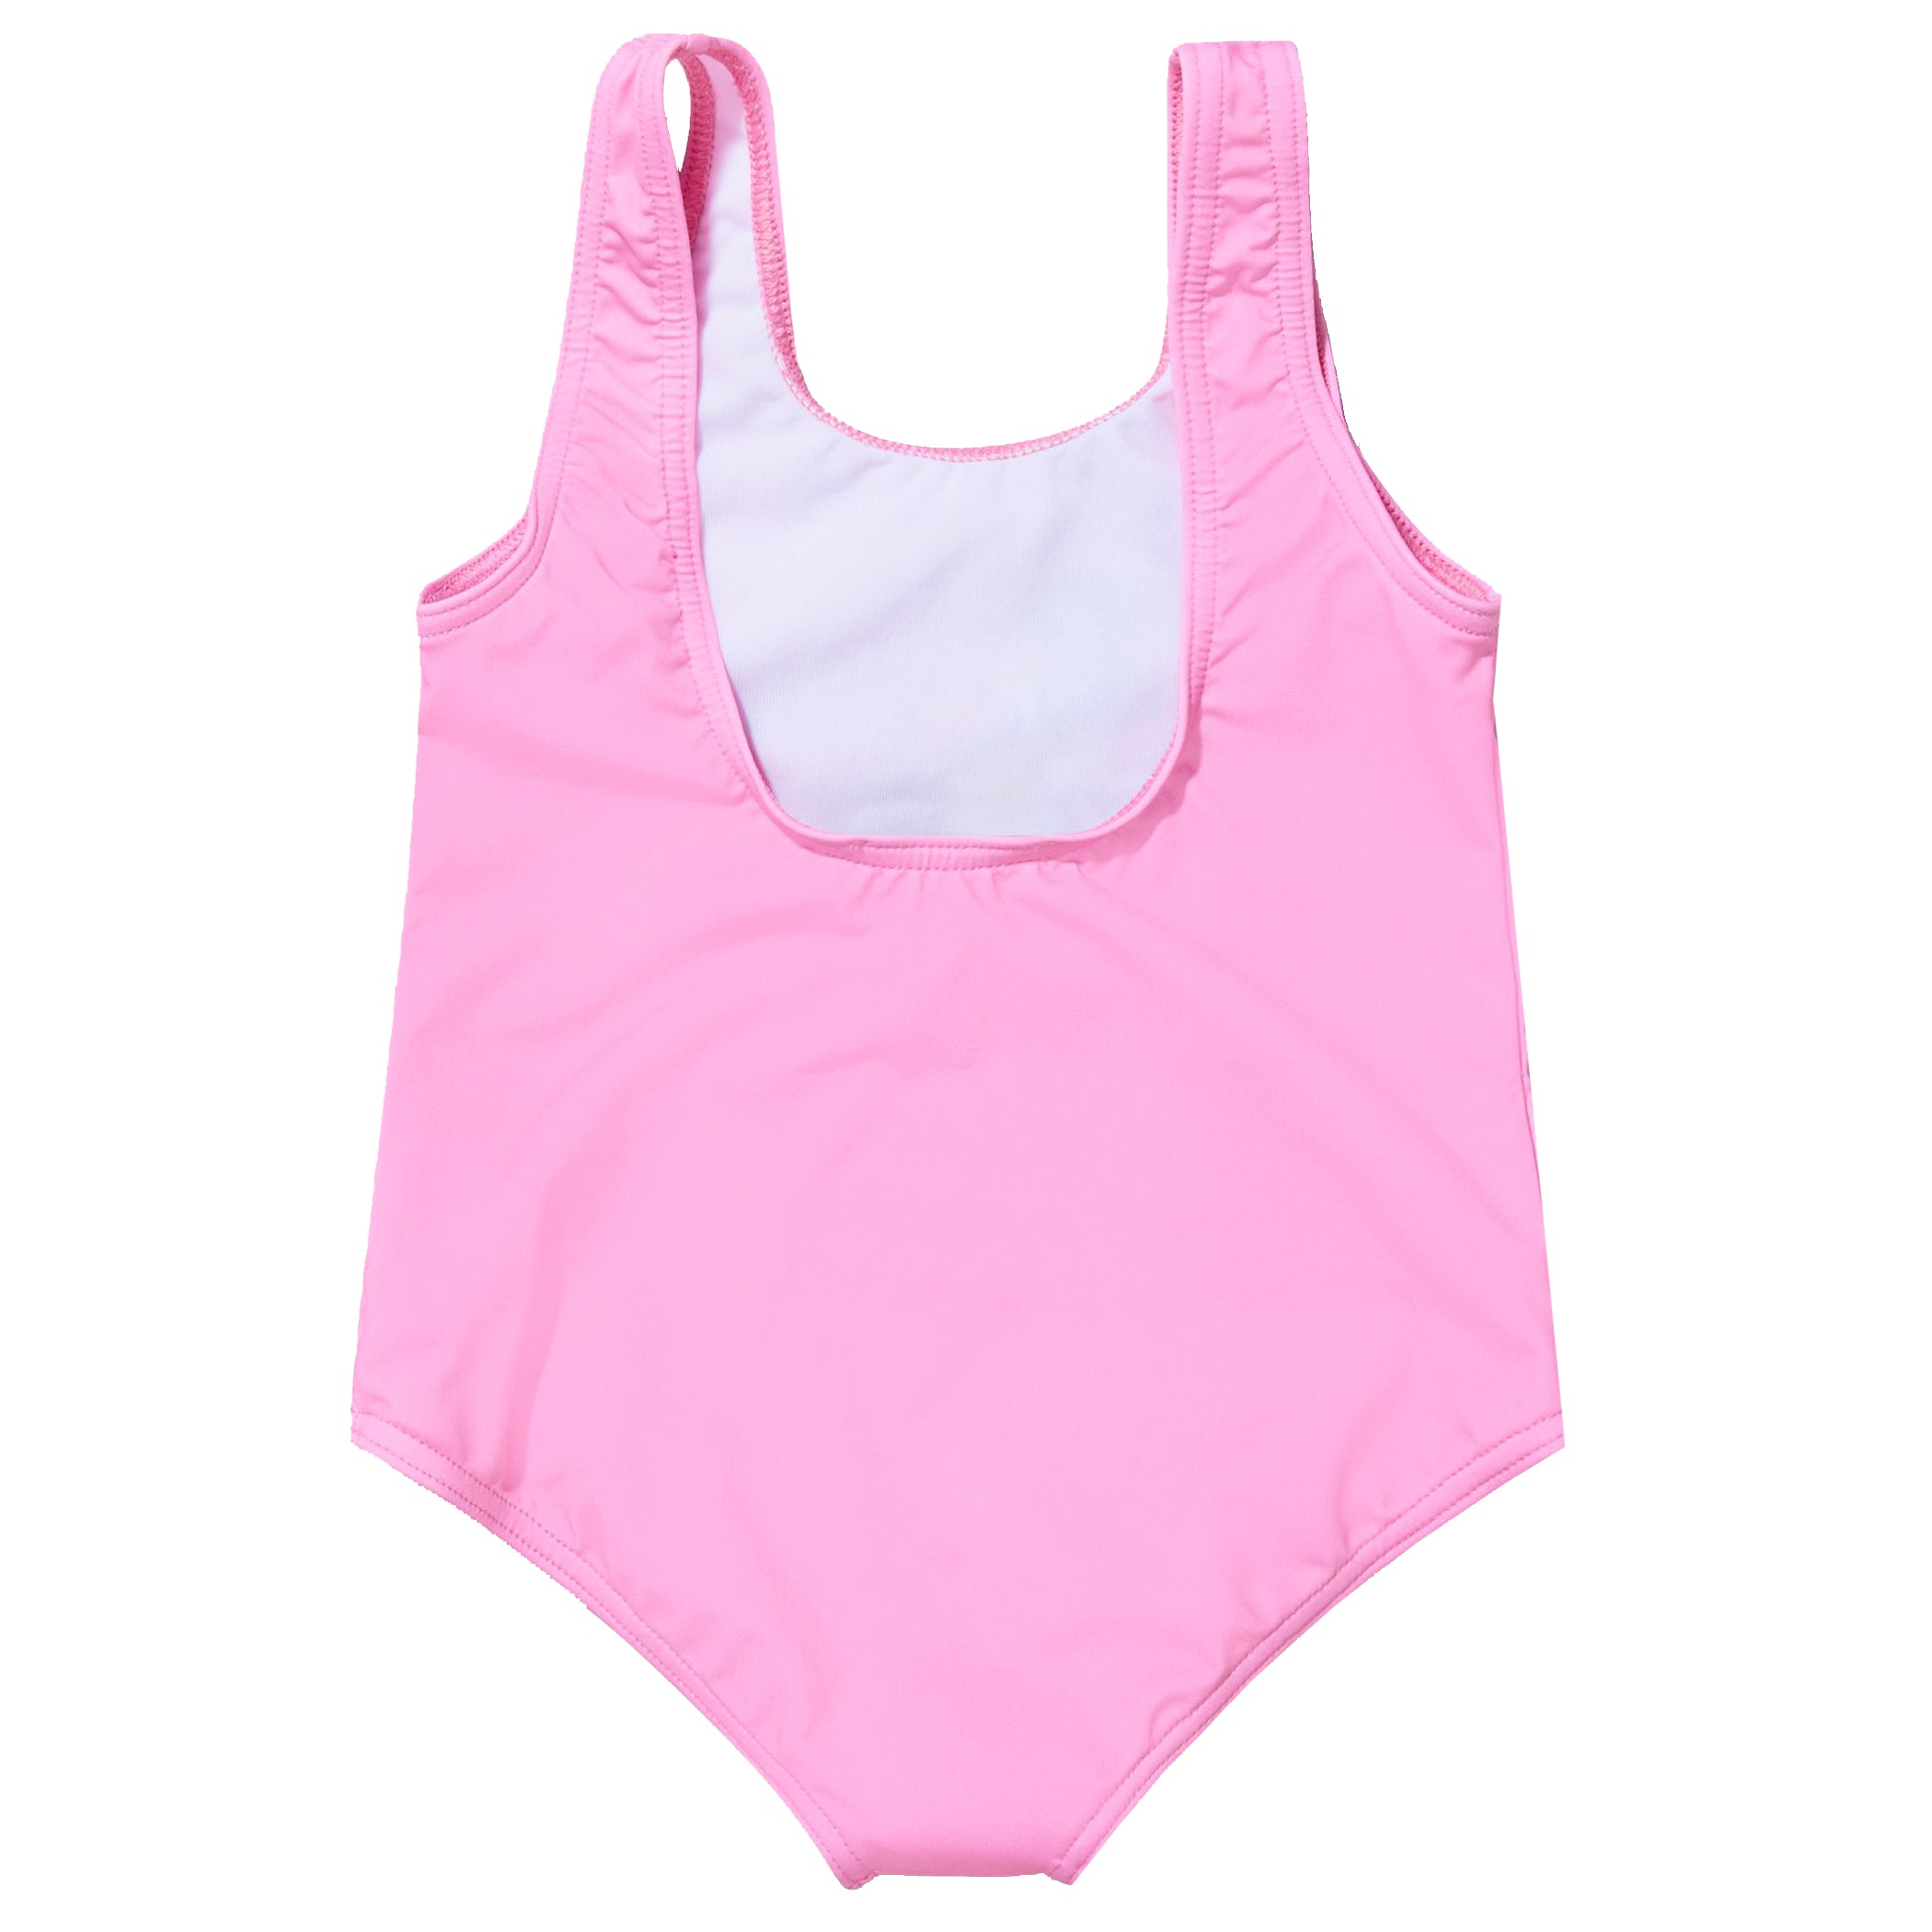 Moschino Baby Girls Toy Bear Swimsuit Pink